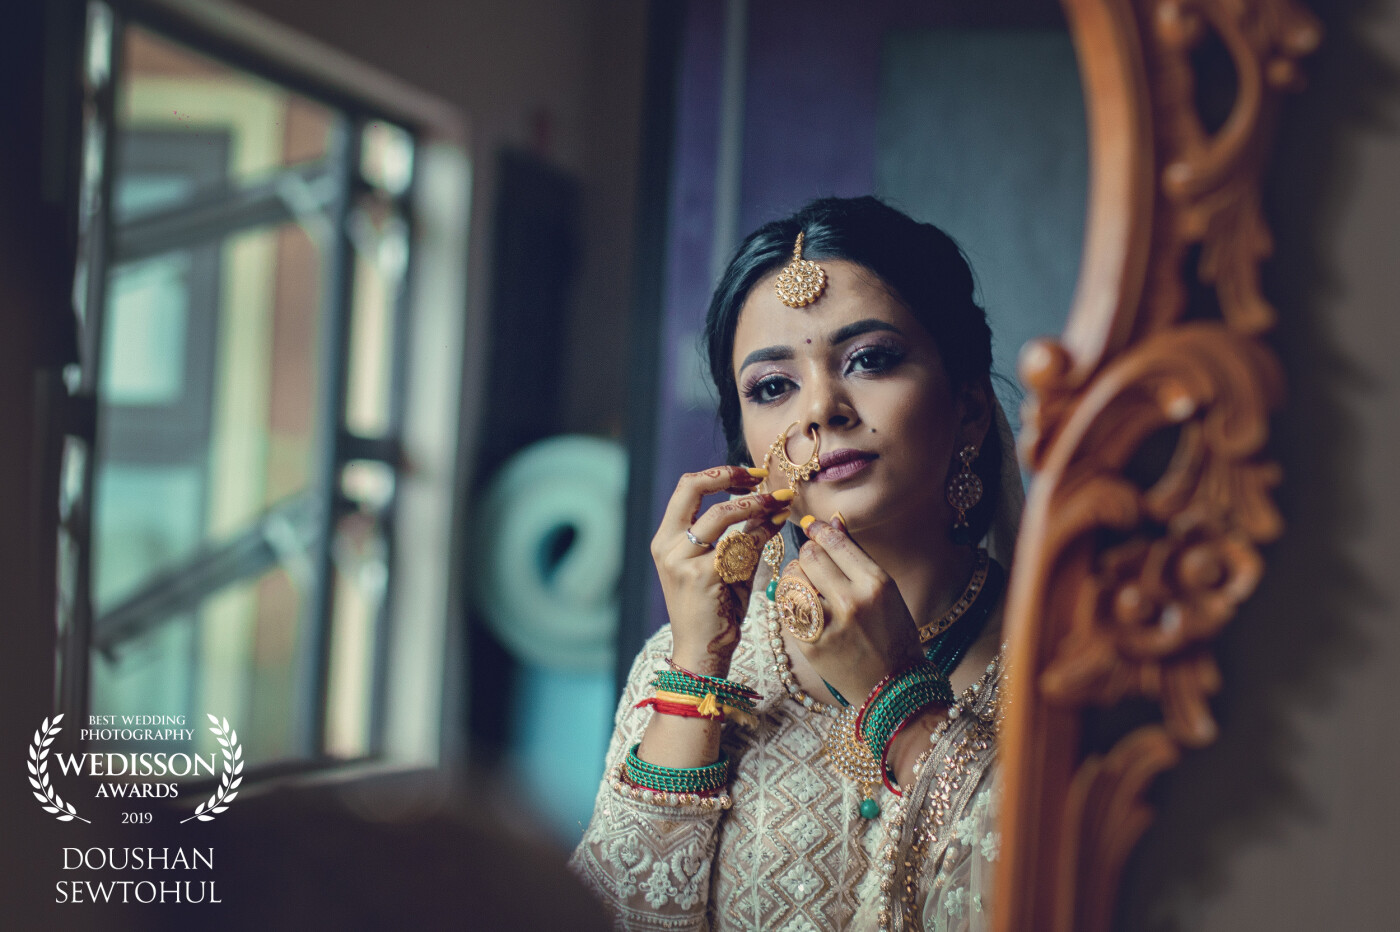 In front of the mirror, She wants her man to see her in the most beautiful attire. She is lost<br />
in her thoughts, waiting for the Grand moment of her life...<br />
<br />
The beauty of Hindu Wedding